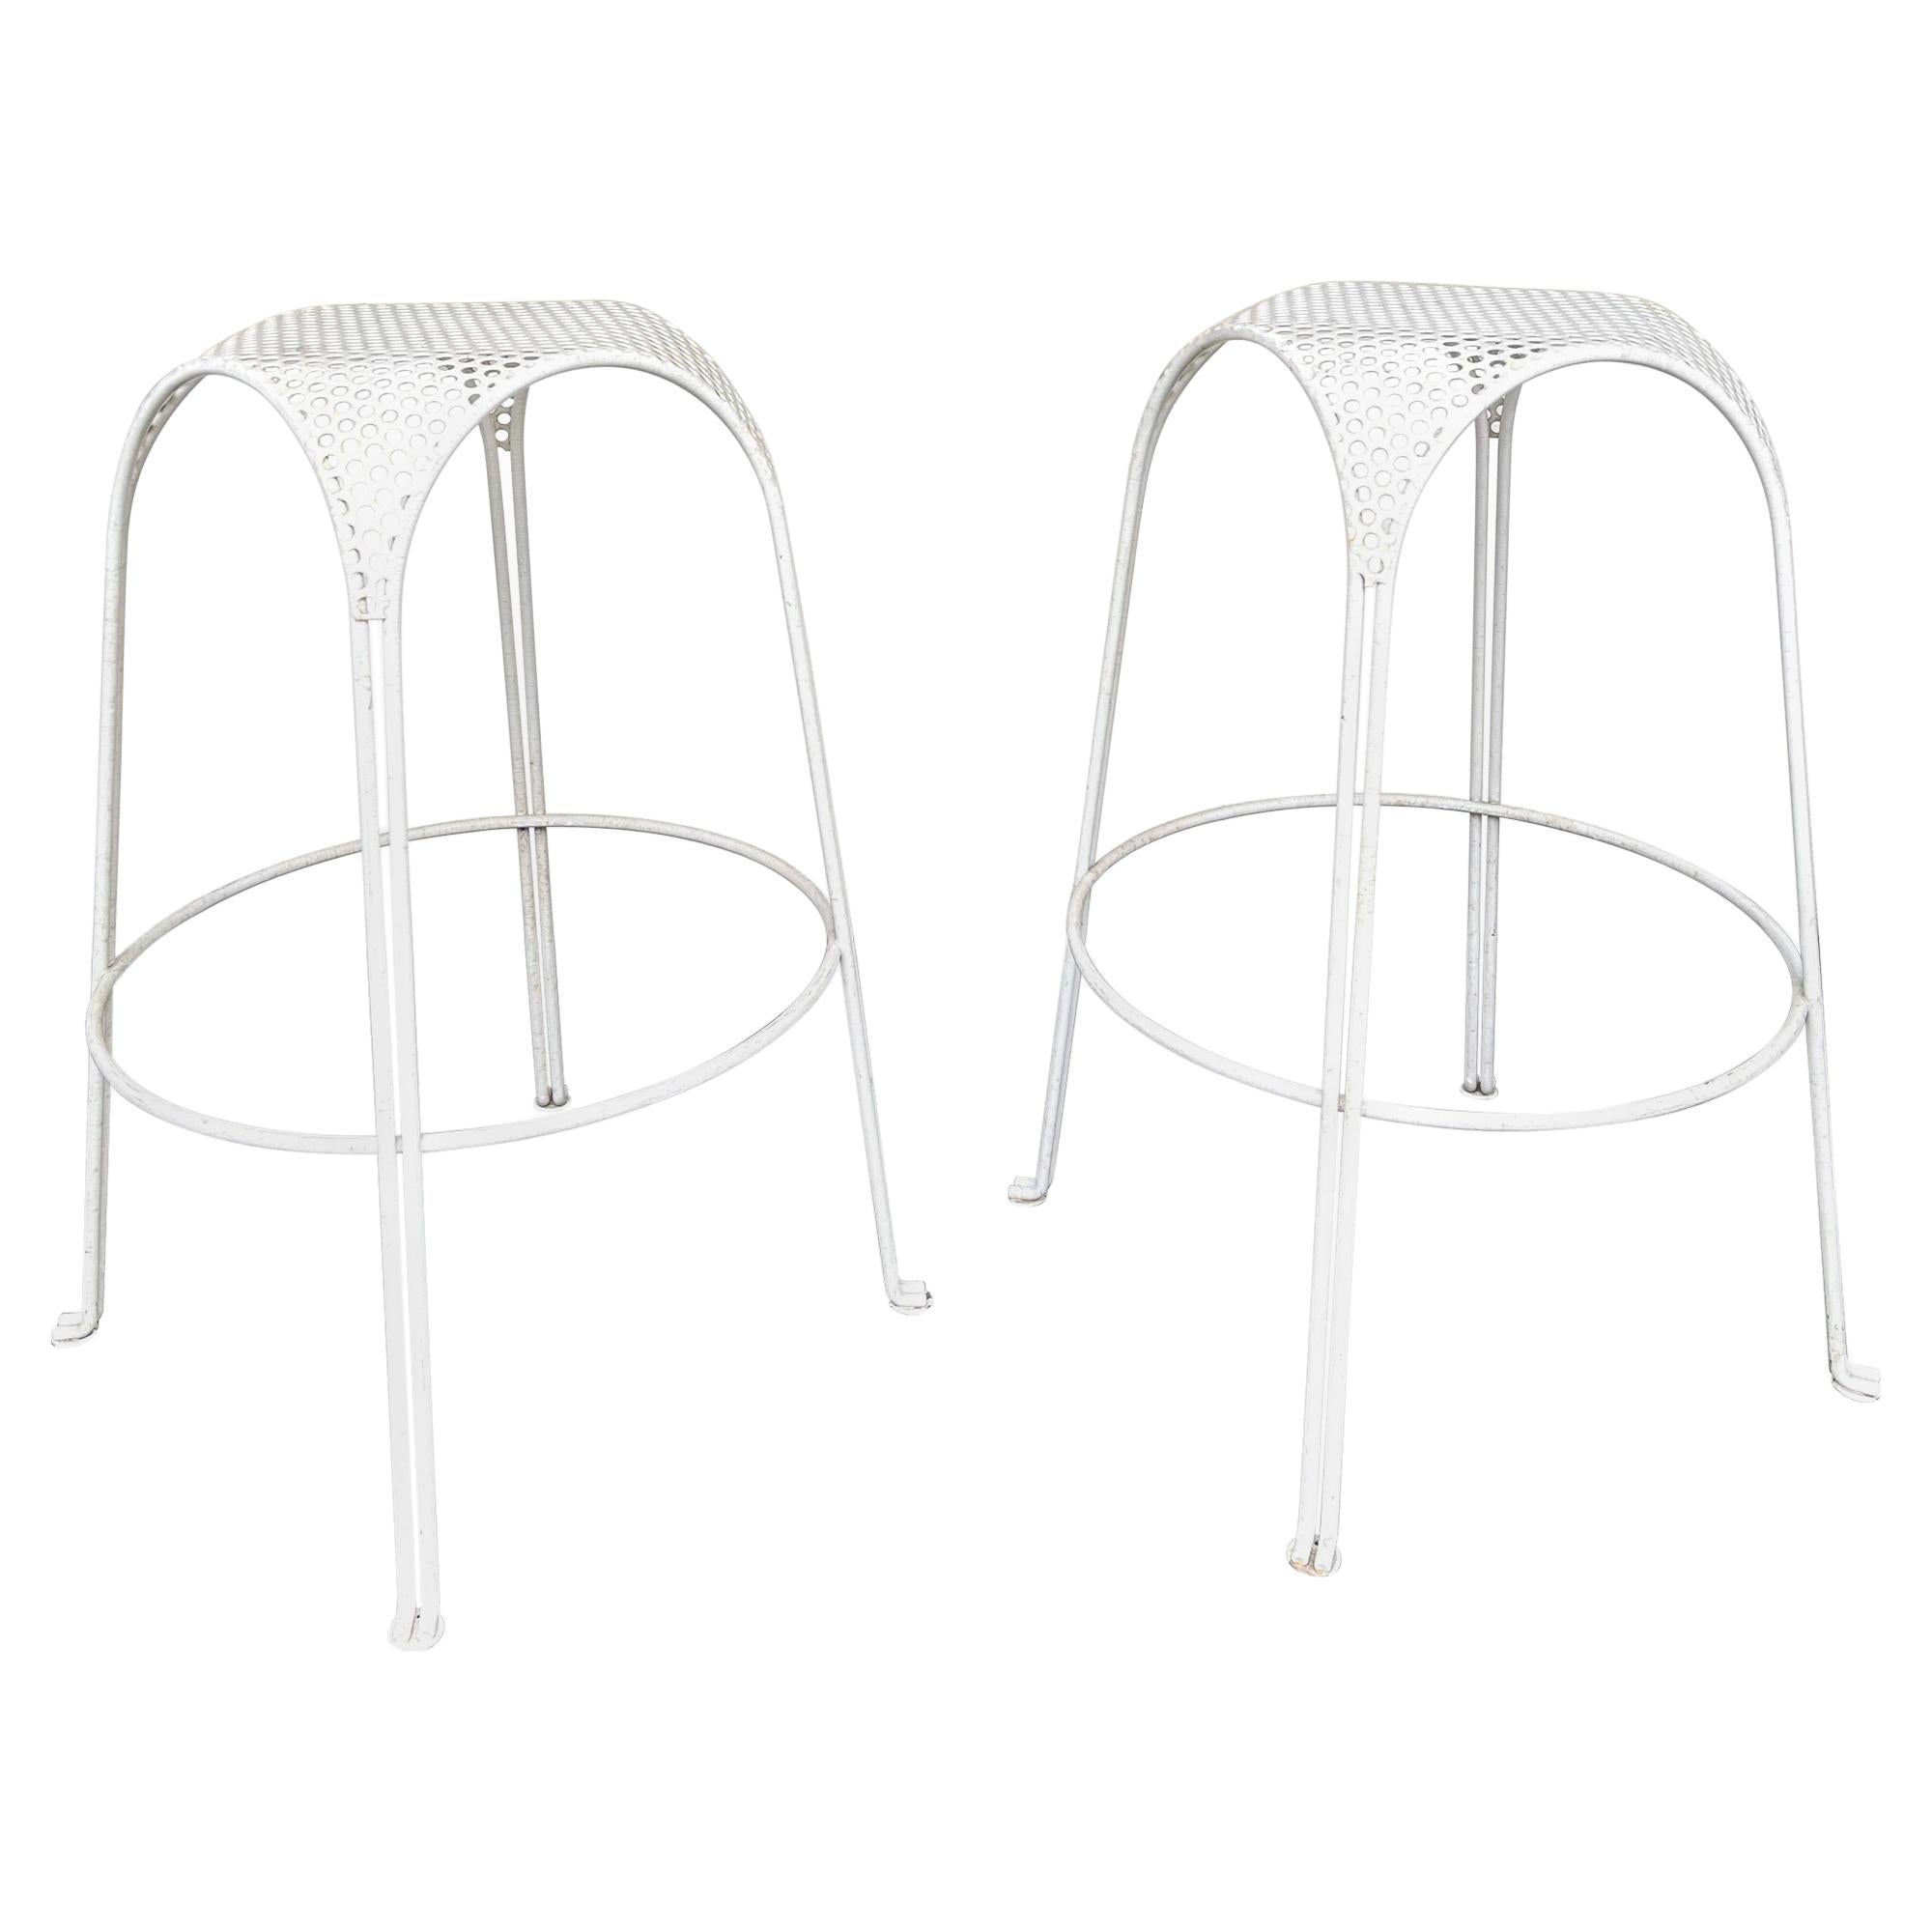 Pair of Bar Stools Metal Perforated by Maurizio Tempestini, Italy, 1950s For Sale